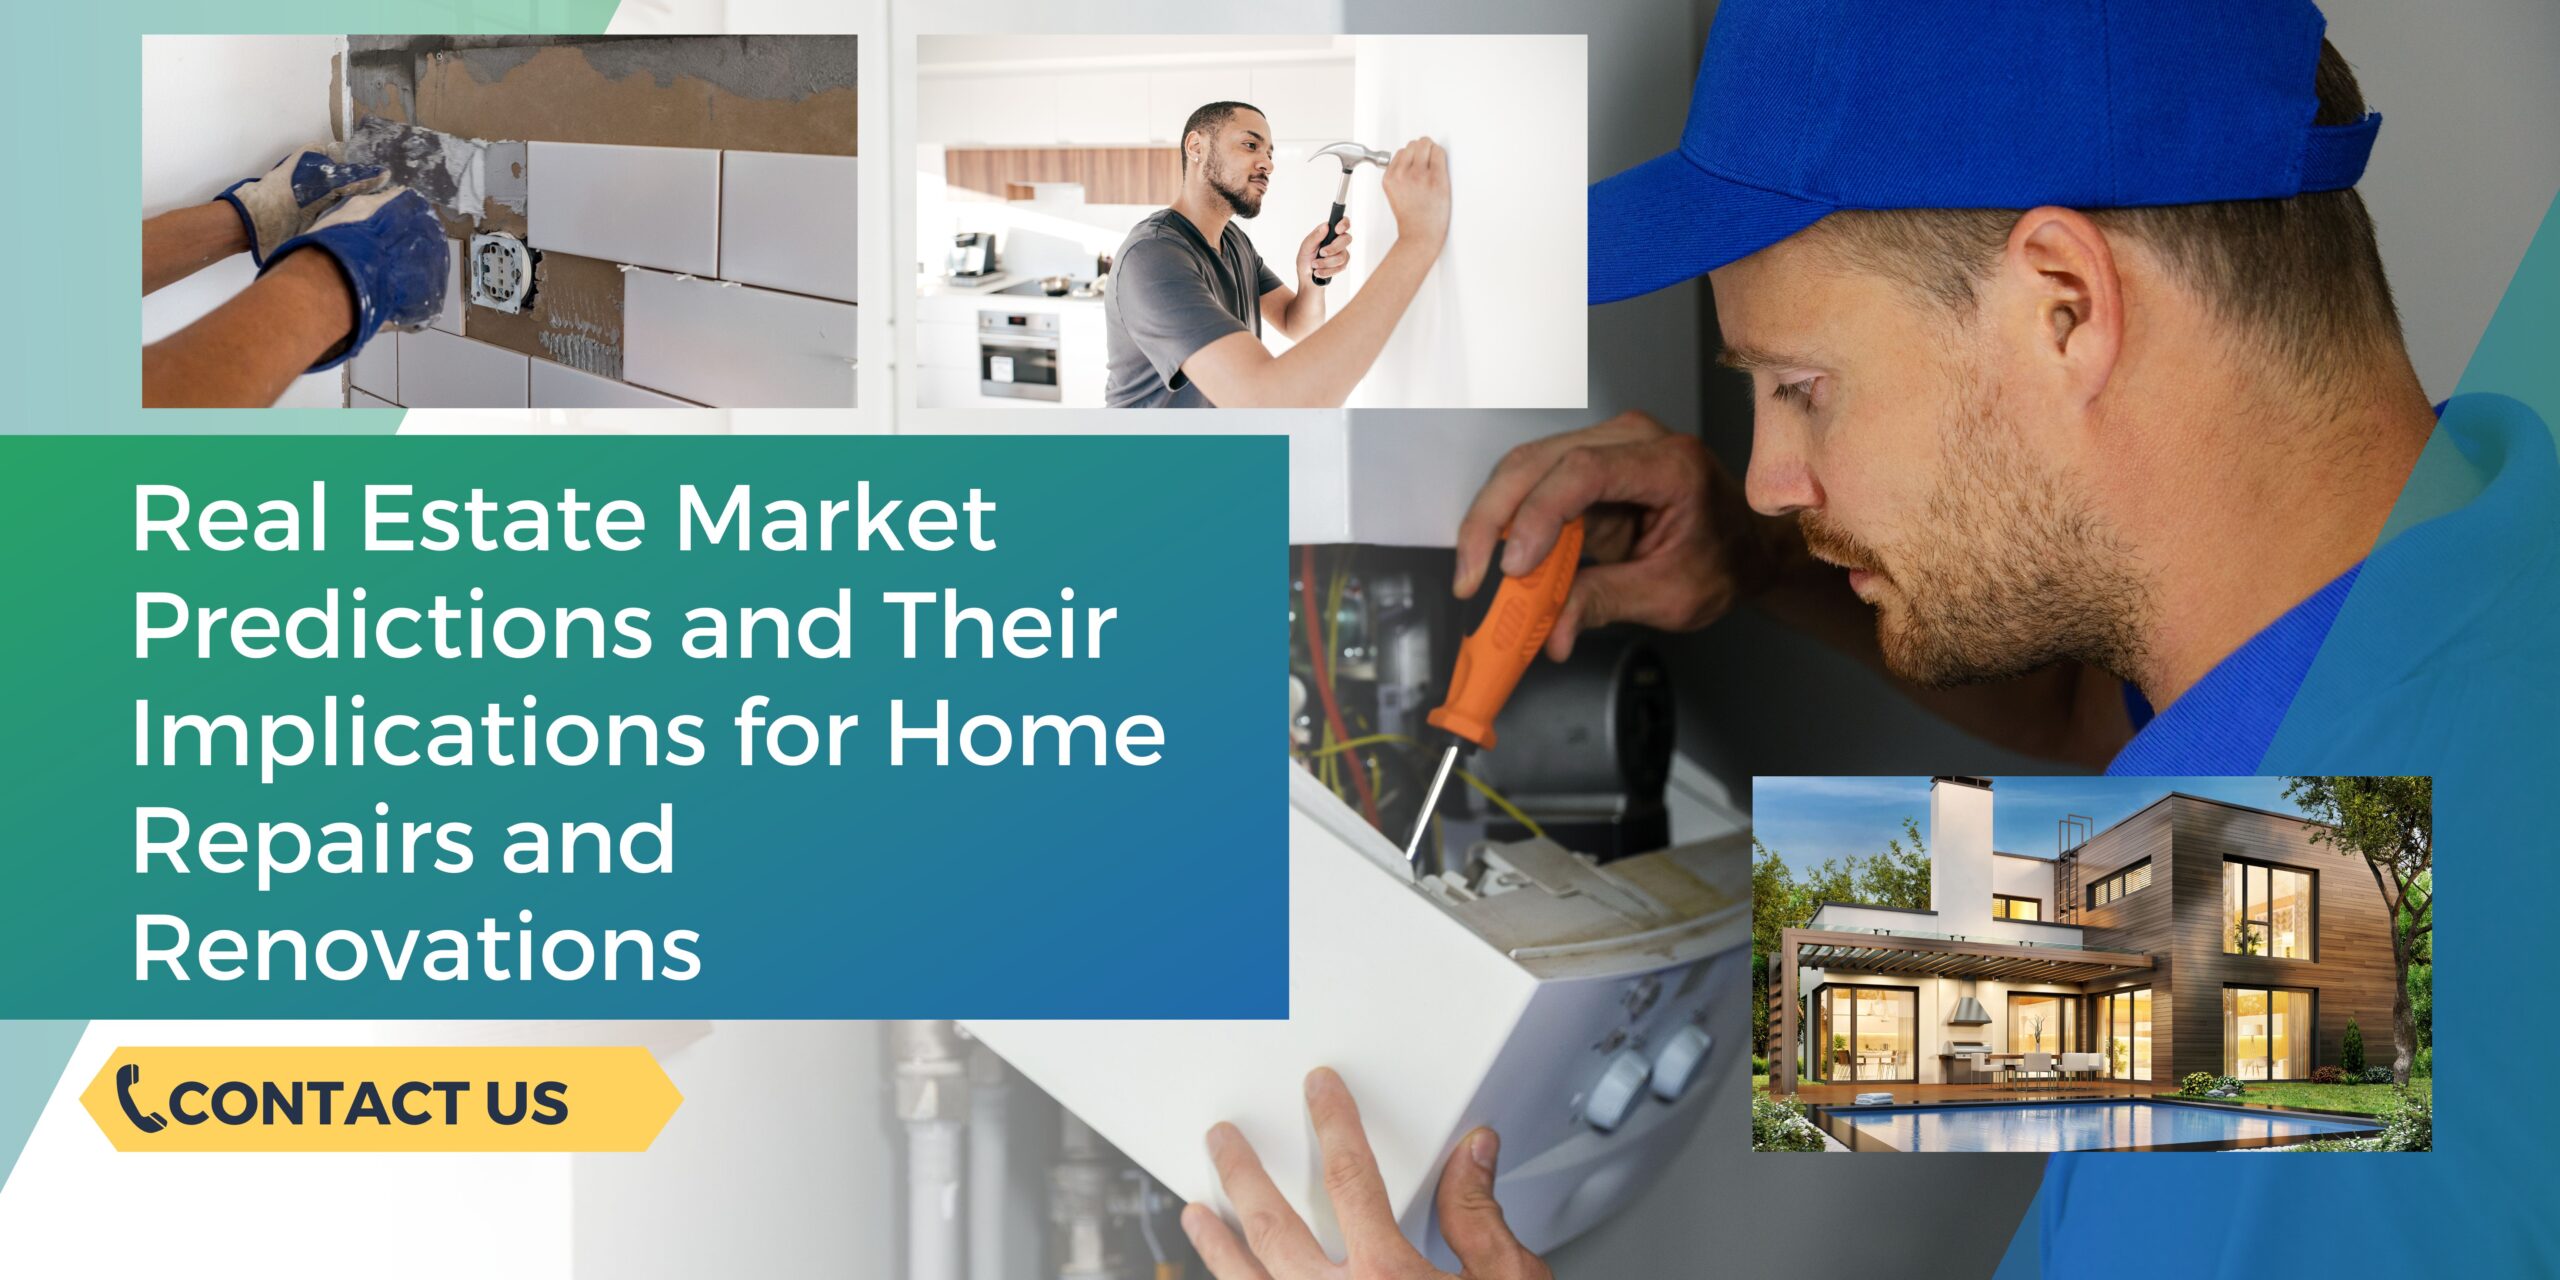 Real Estate Market Predictions and Their Implications for Home Repairs and Renovations